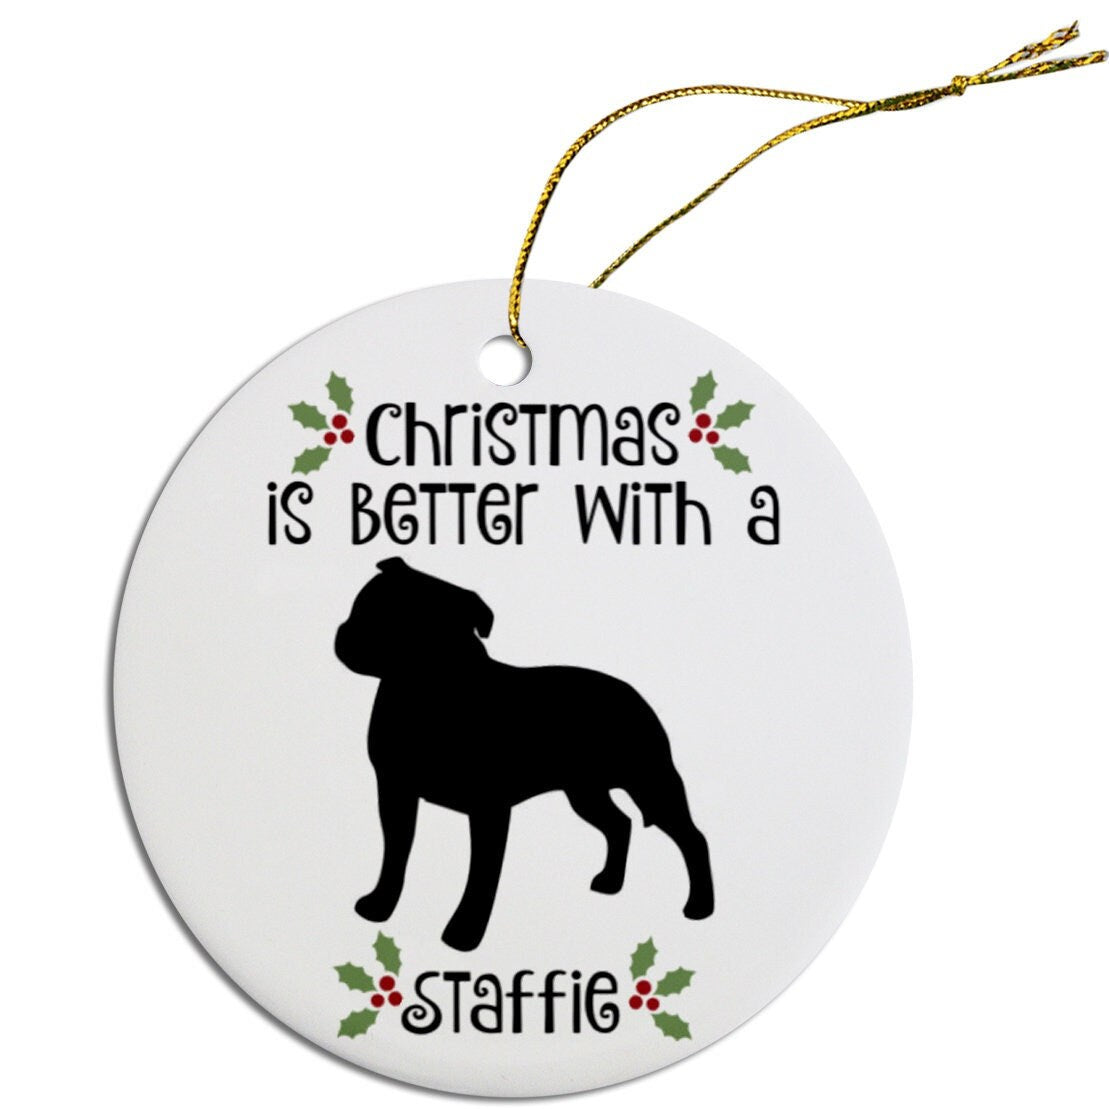 Dog Breed Specific Round Christmas Ornament, "Staffie"